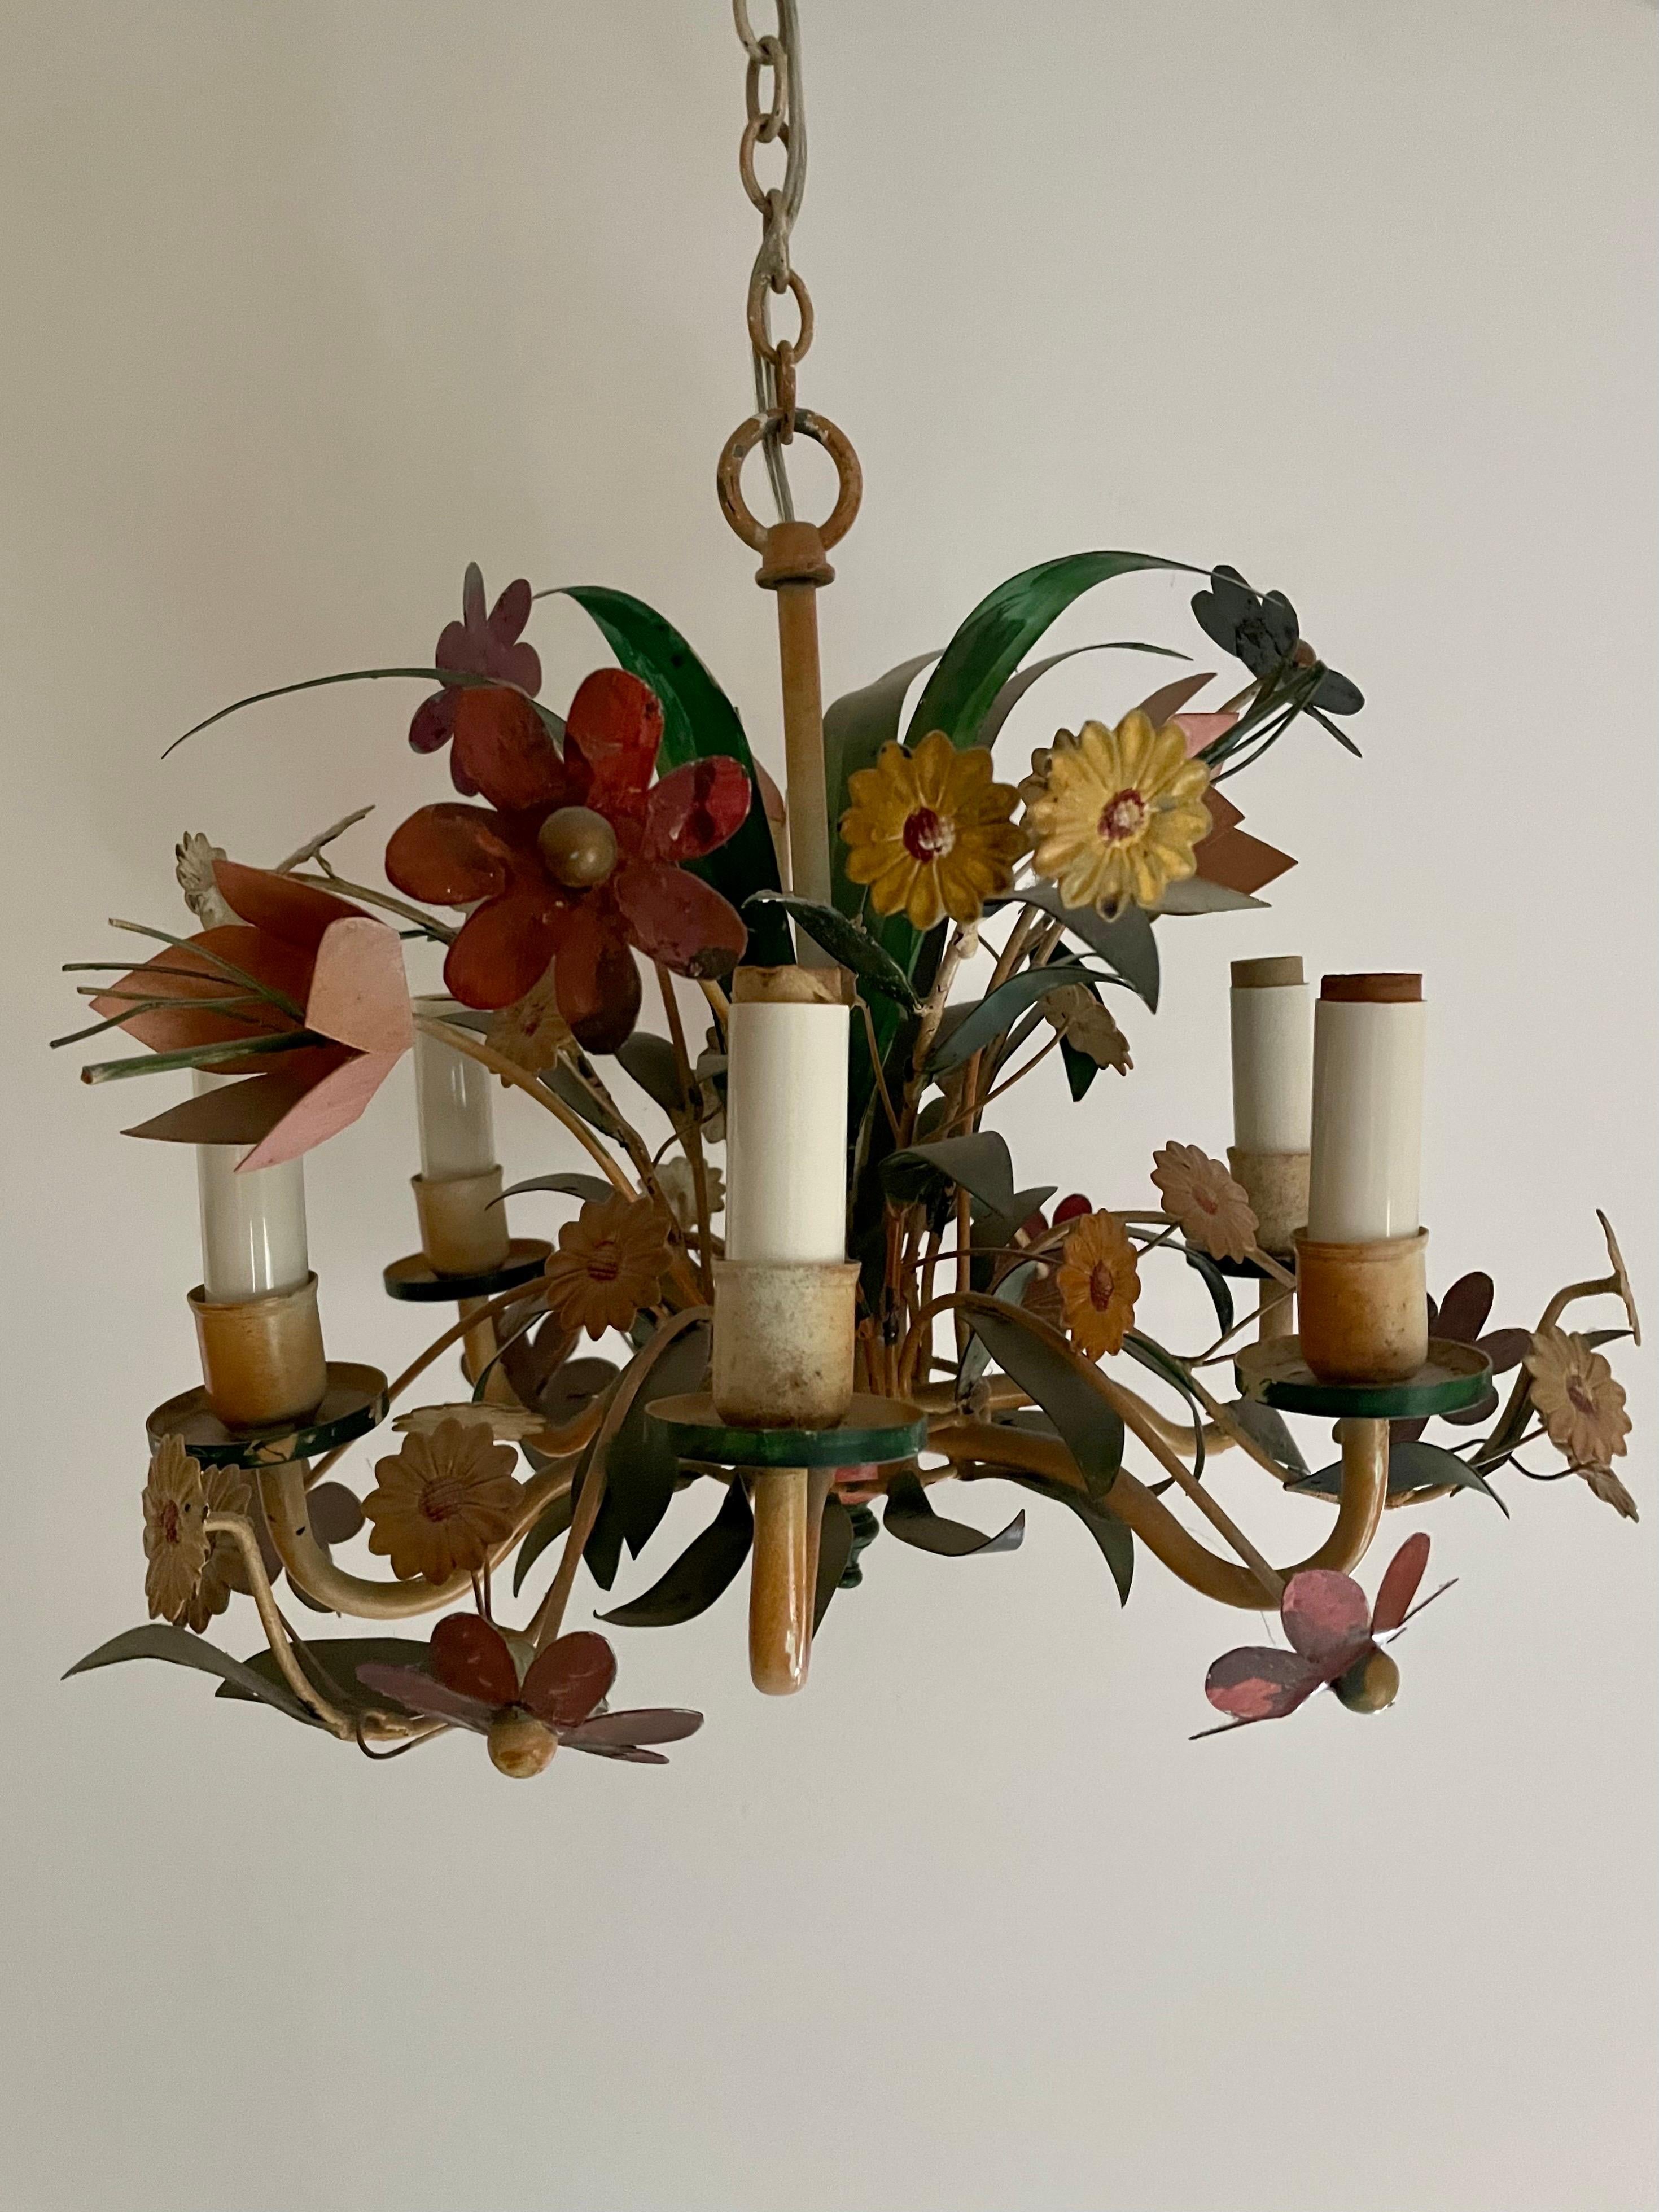 Hollywood Regency tole floral bouquet chandelier. Like a bouquet with many types of multi color flowers and leaves. Original ceiling cap. Made in Italy. Six arms. Measures 14